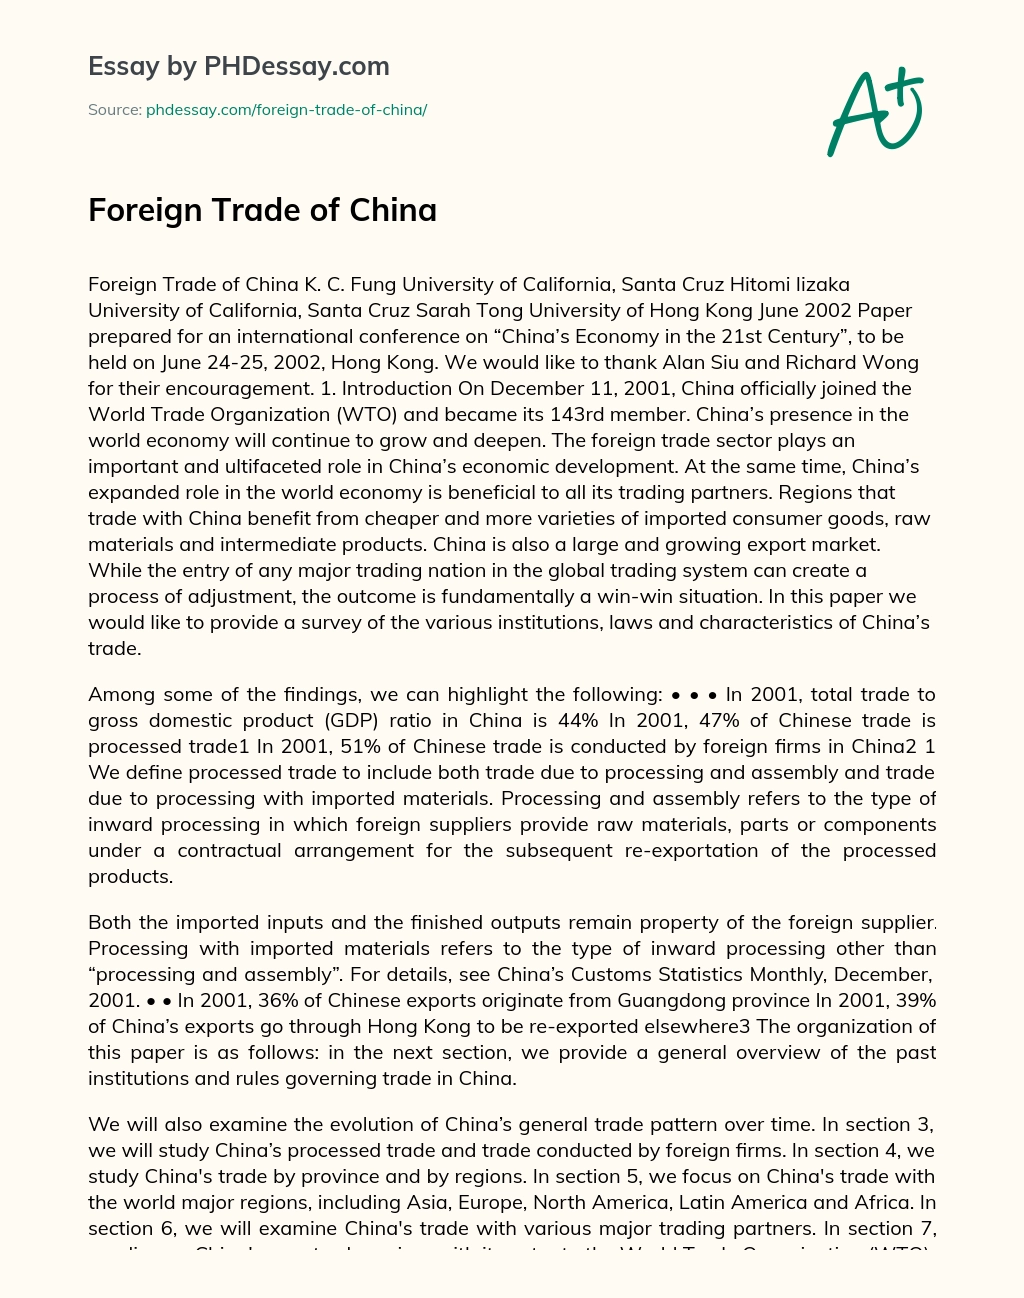 Foreign Trade of China essay